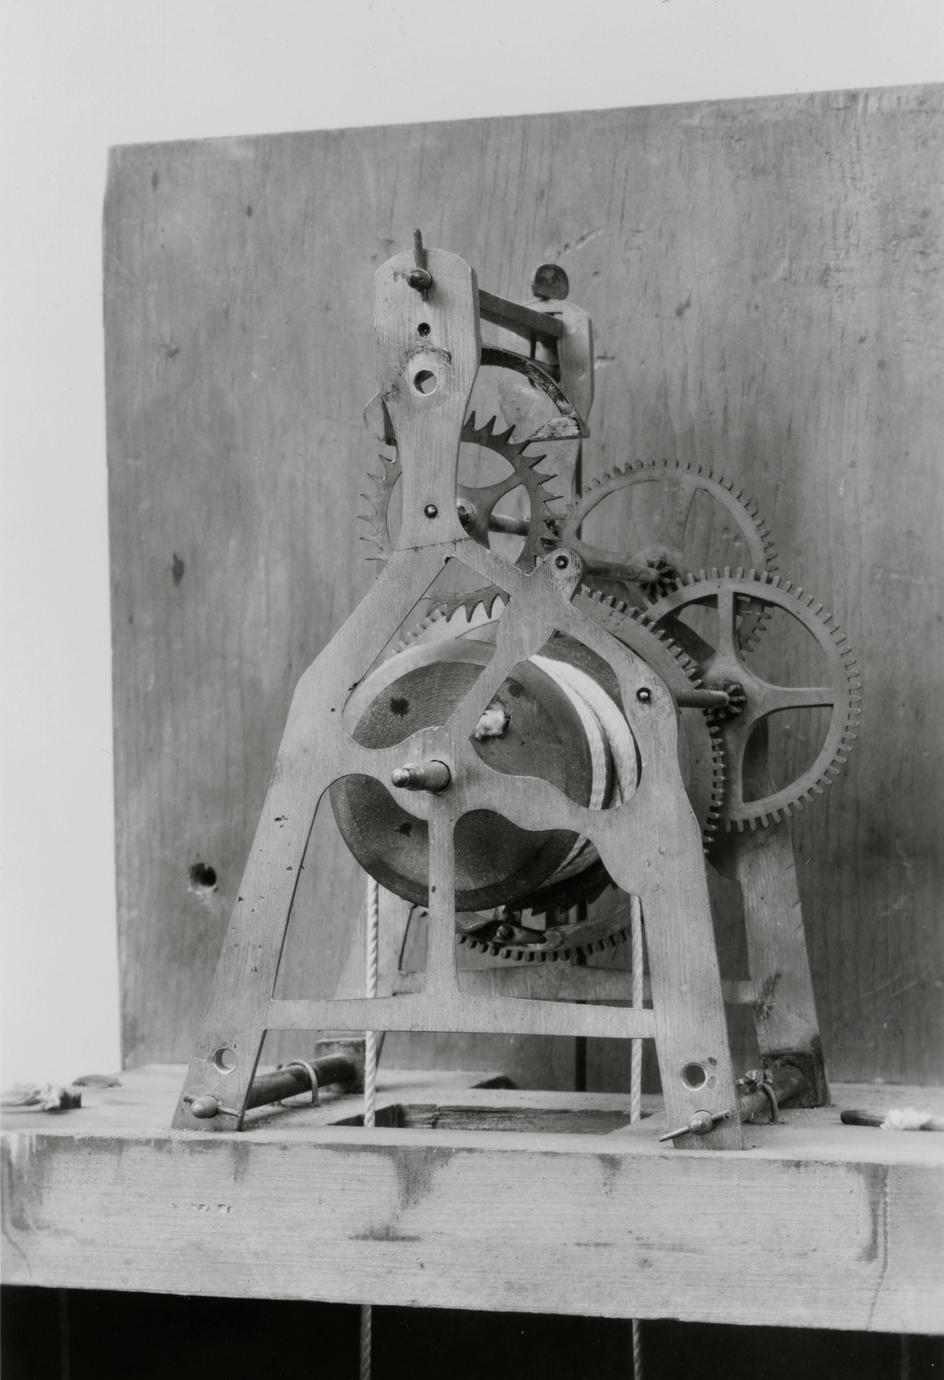 Black and white photograph of a timepiece gear system.